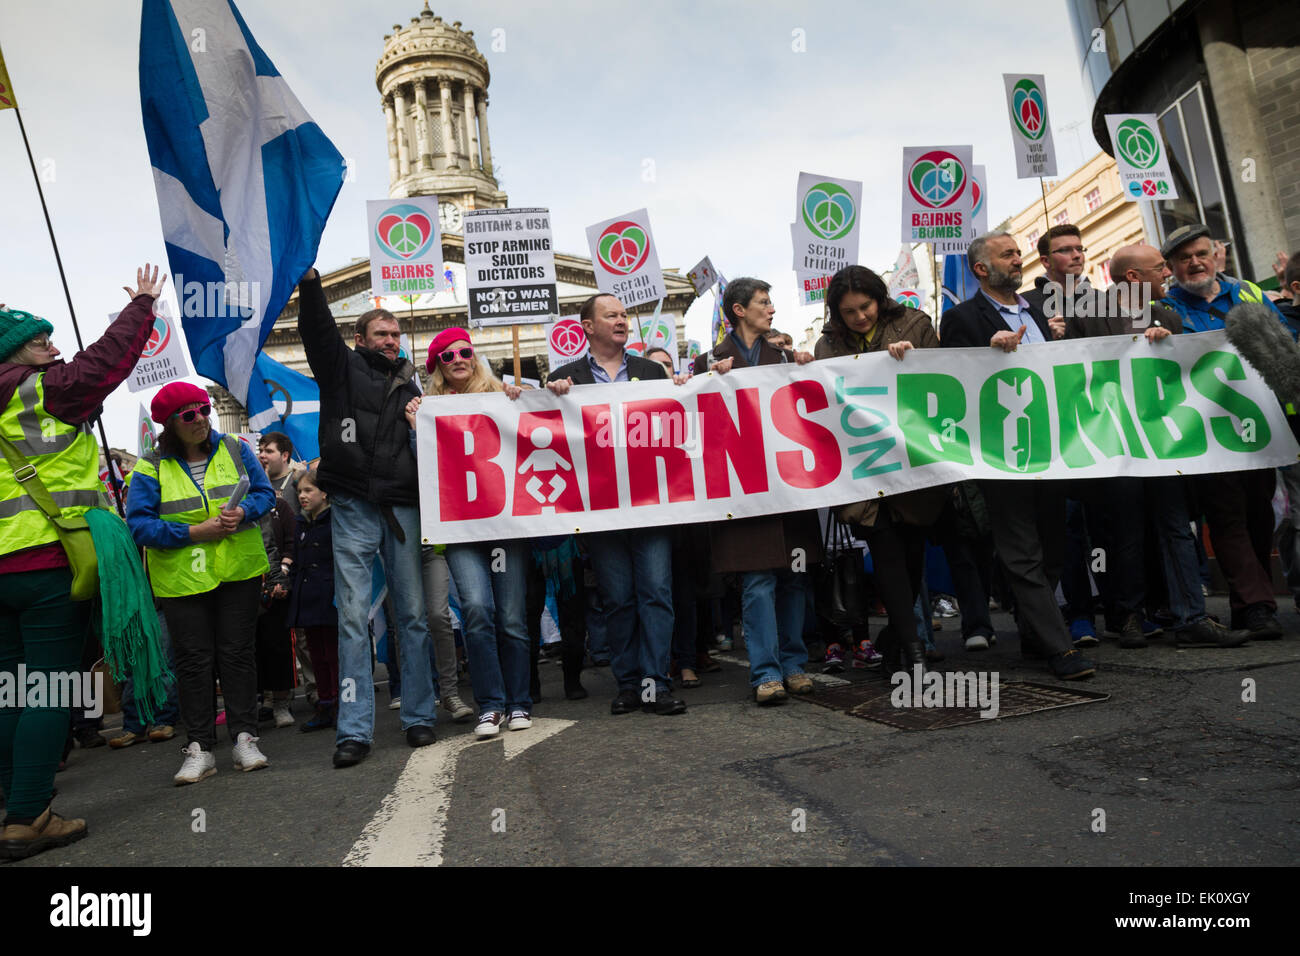 Bairns Not Bombs, anti-Trident march, Glasgow Stock Photo